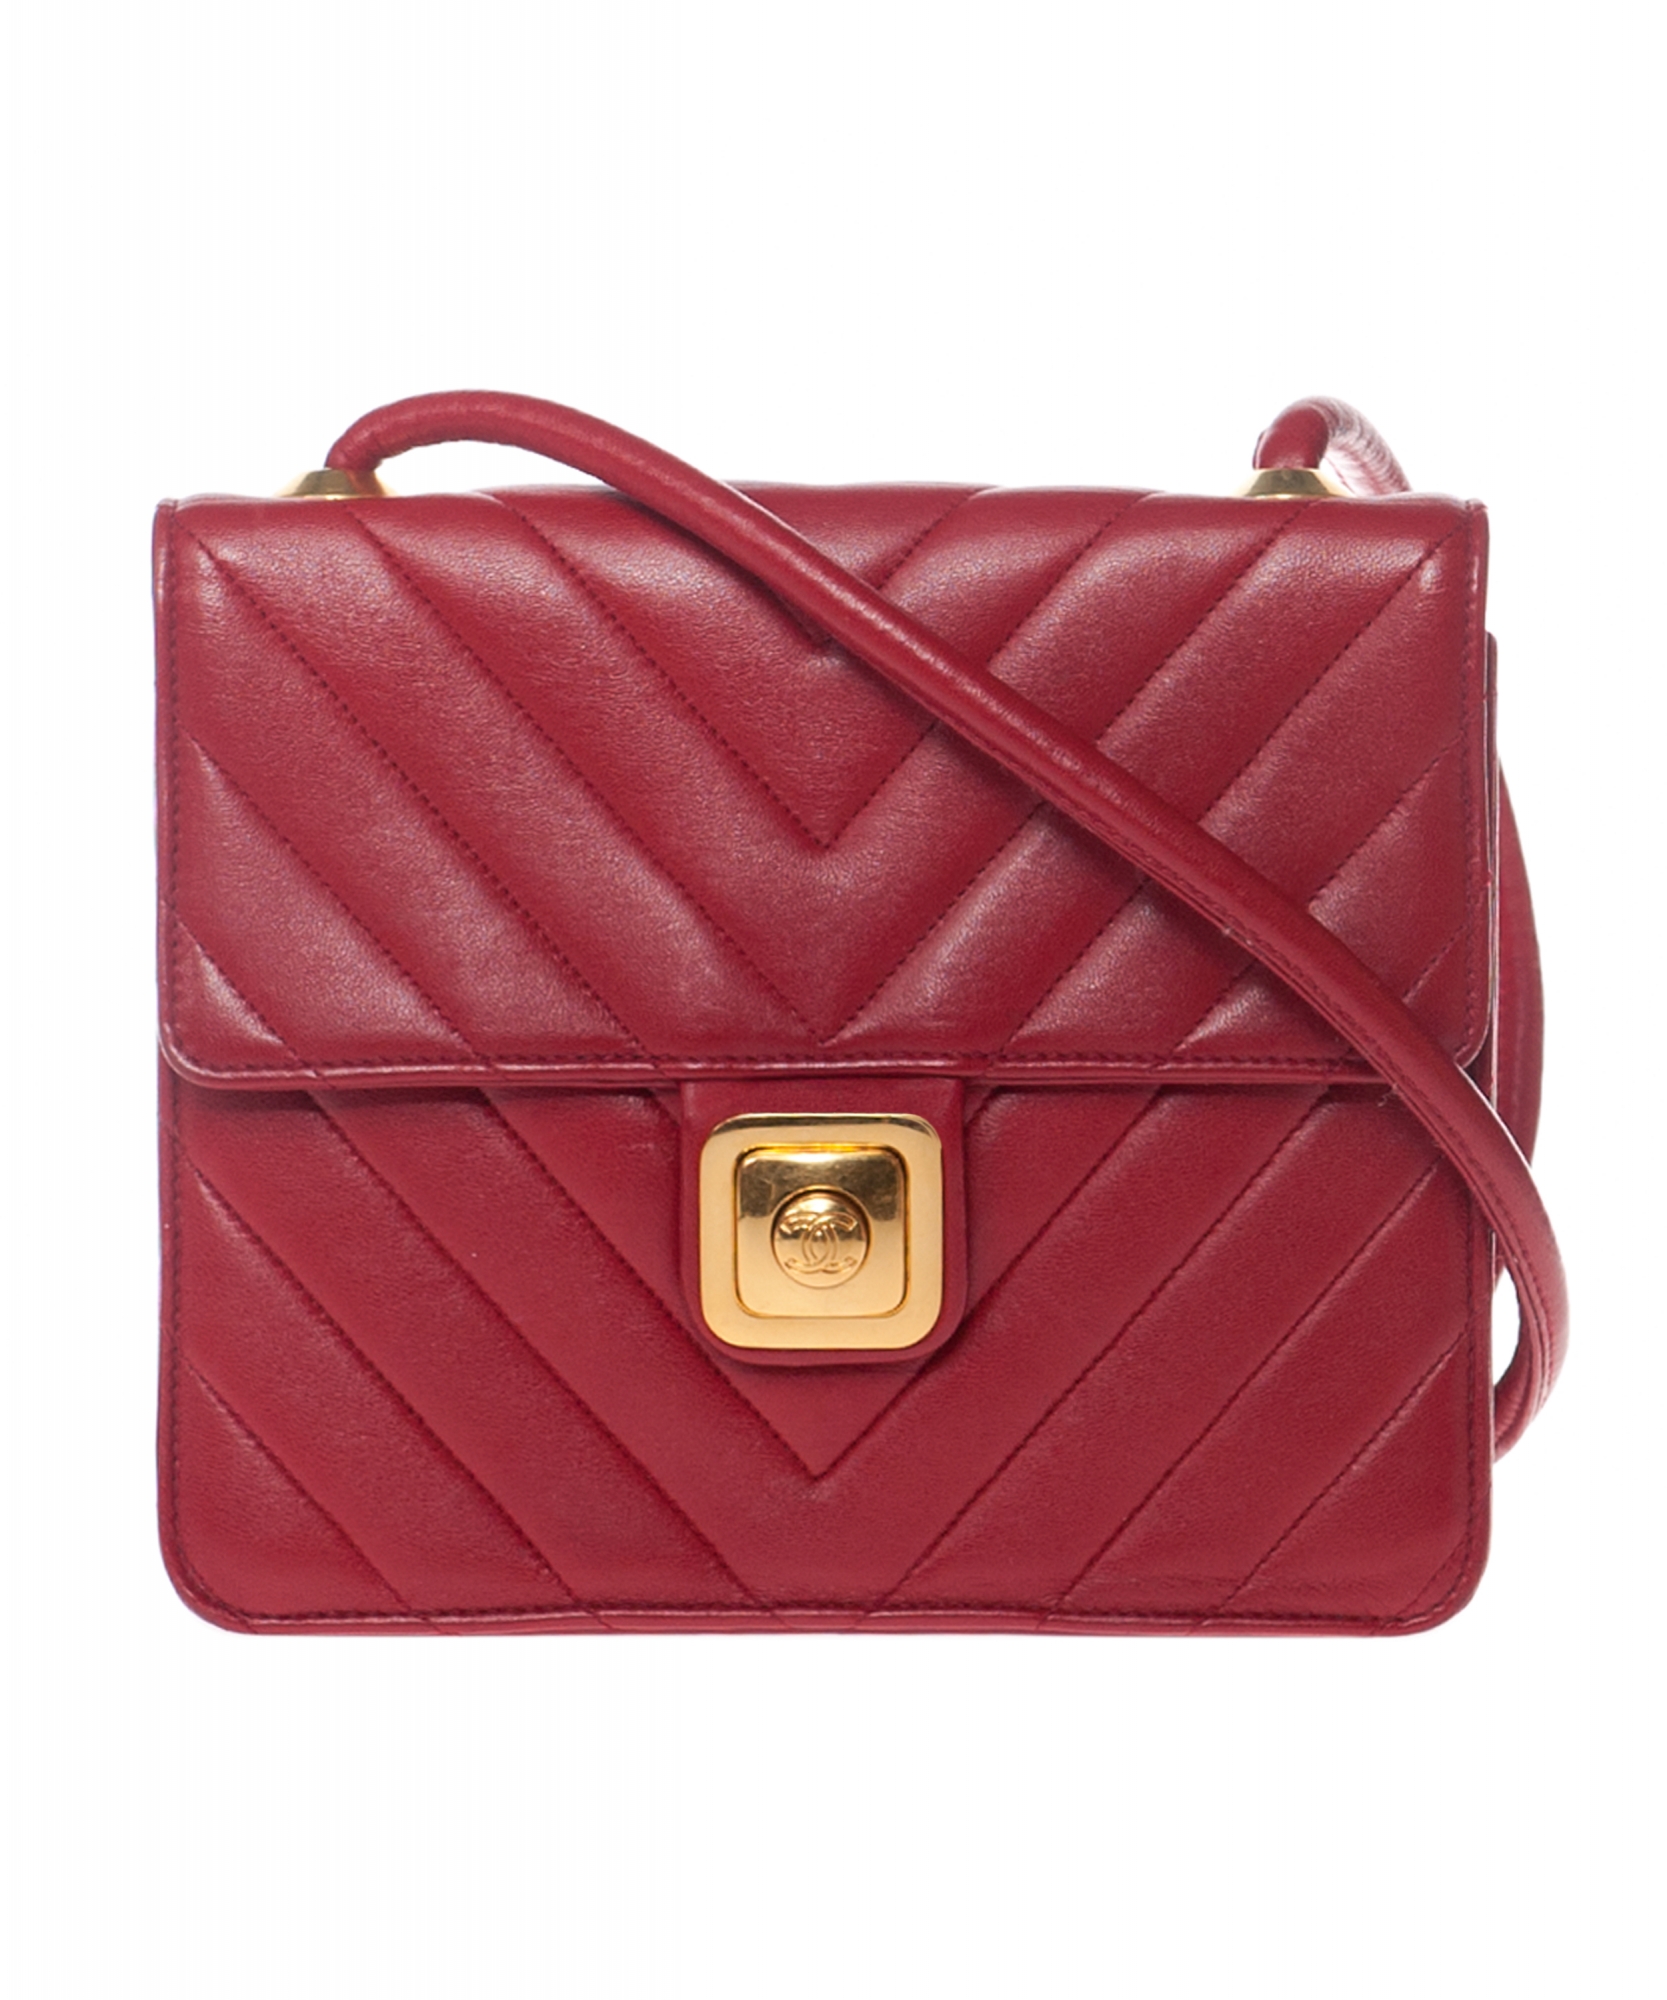 Chanel Red Chevron Quilted Crossbody Bag - Chanel | ArtListings